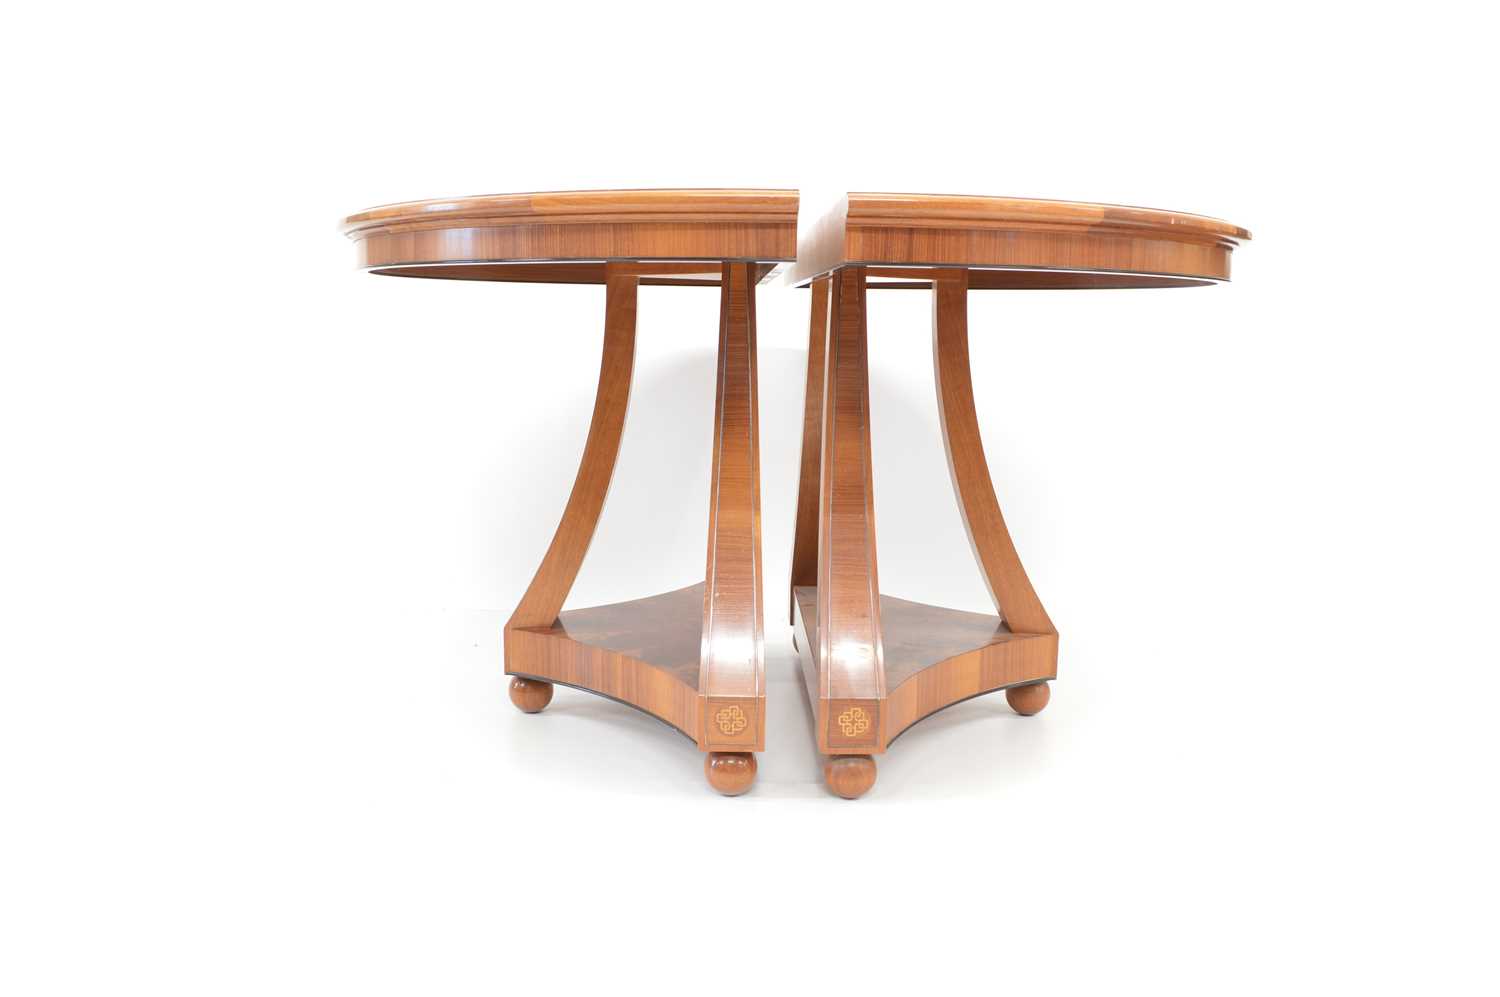 Pair of Mahogany side tables by Silver Linings workshop - Image 6 of 9